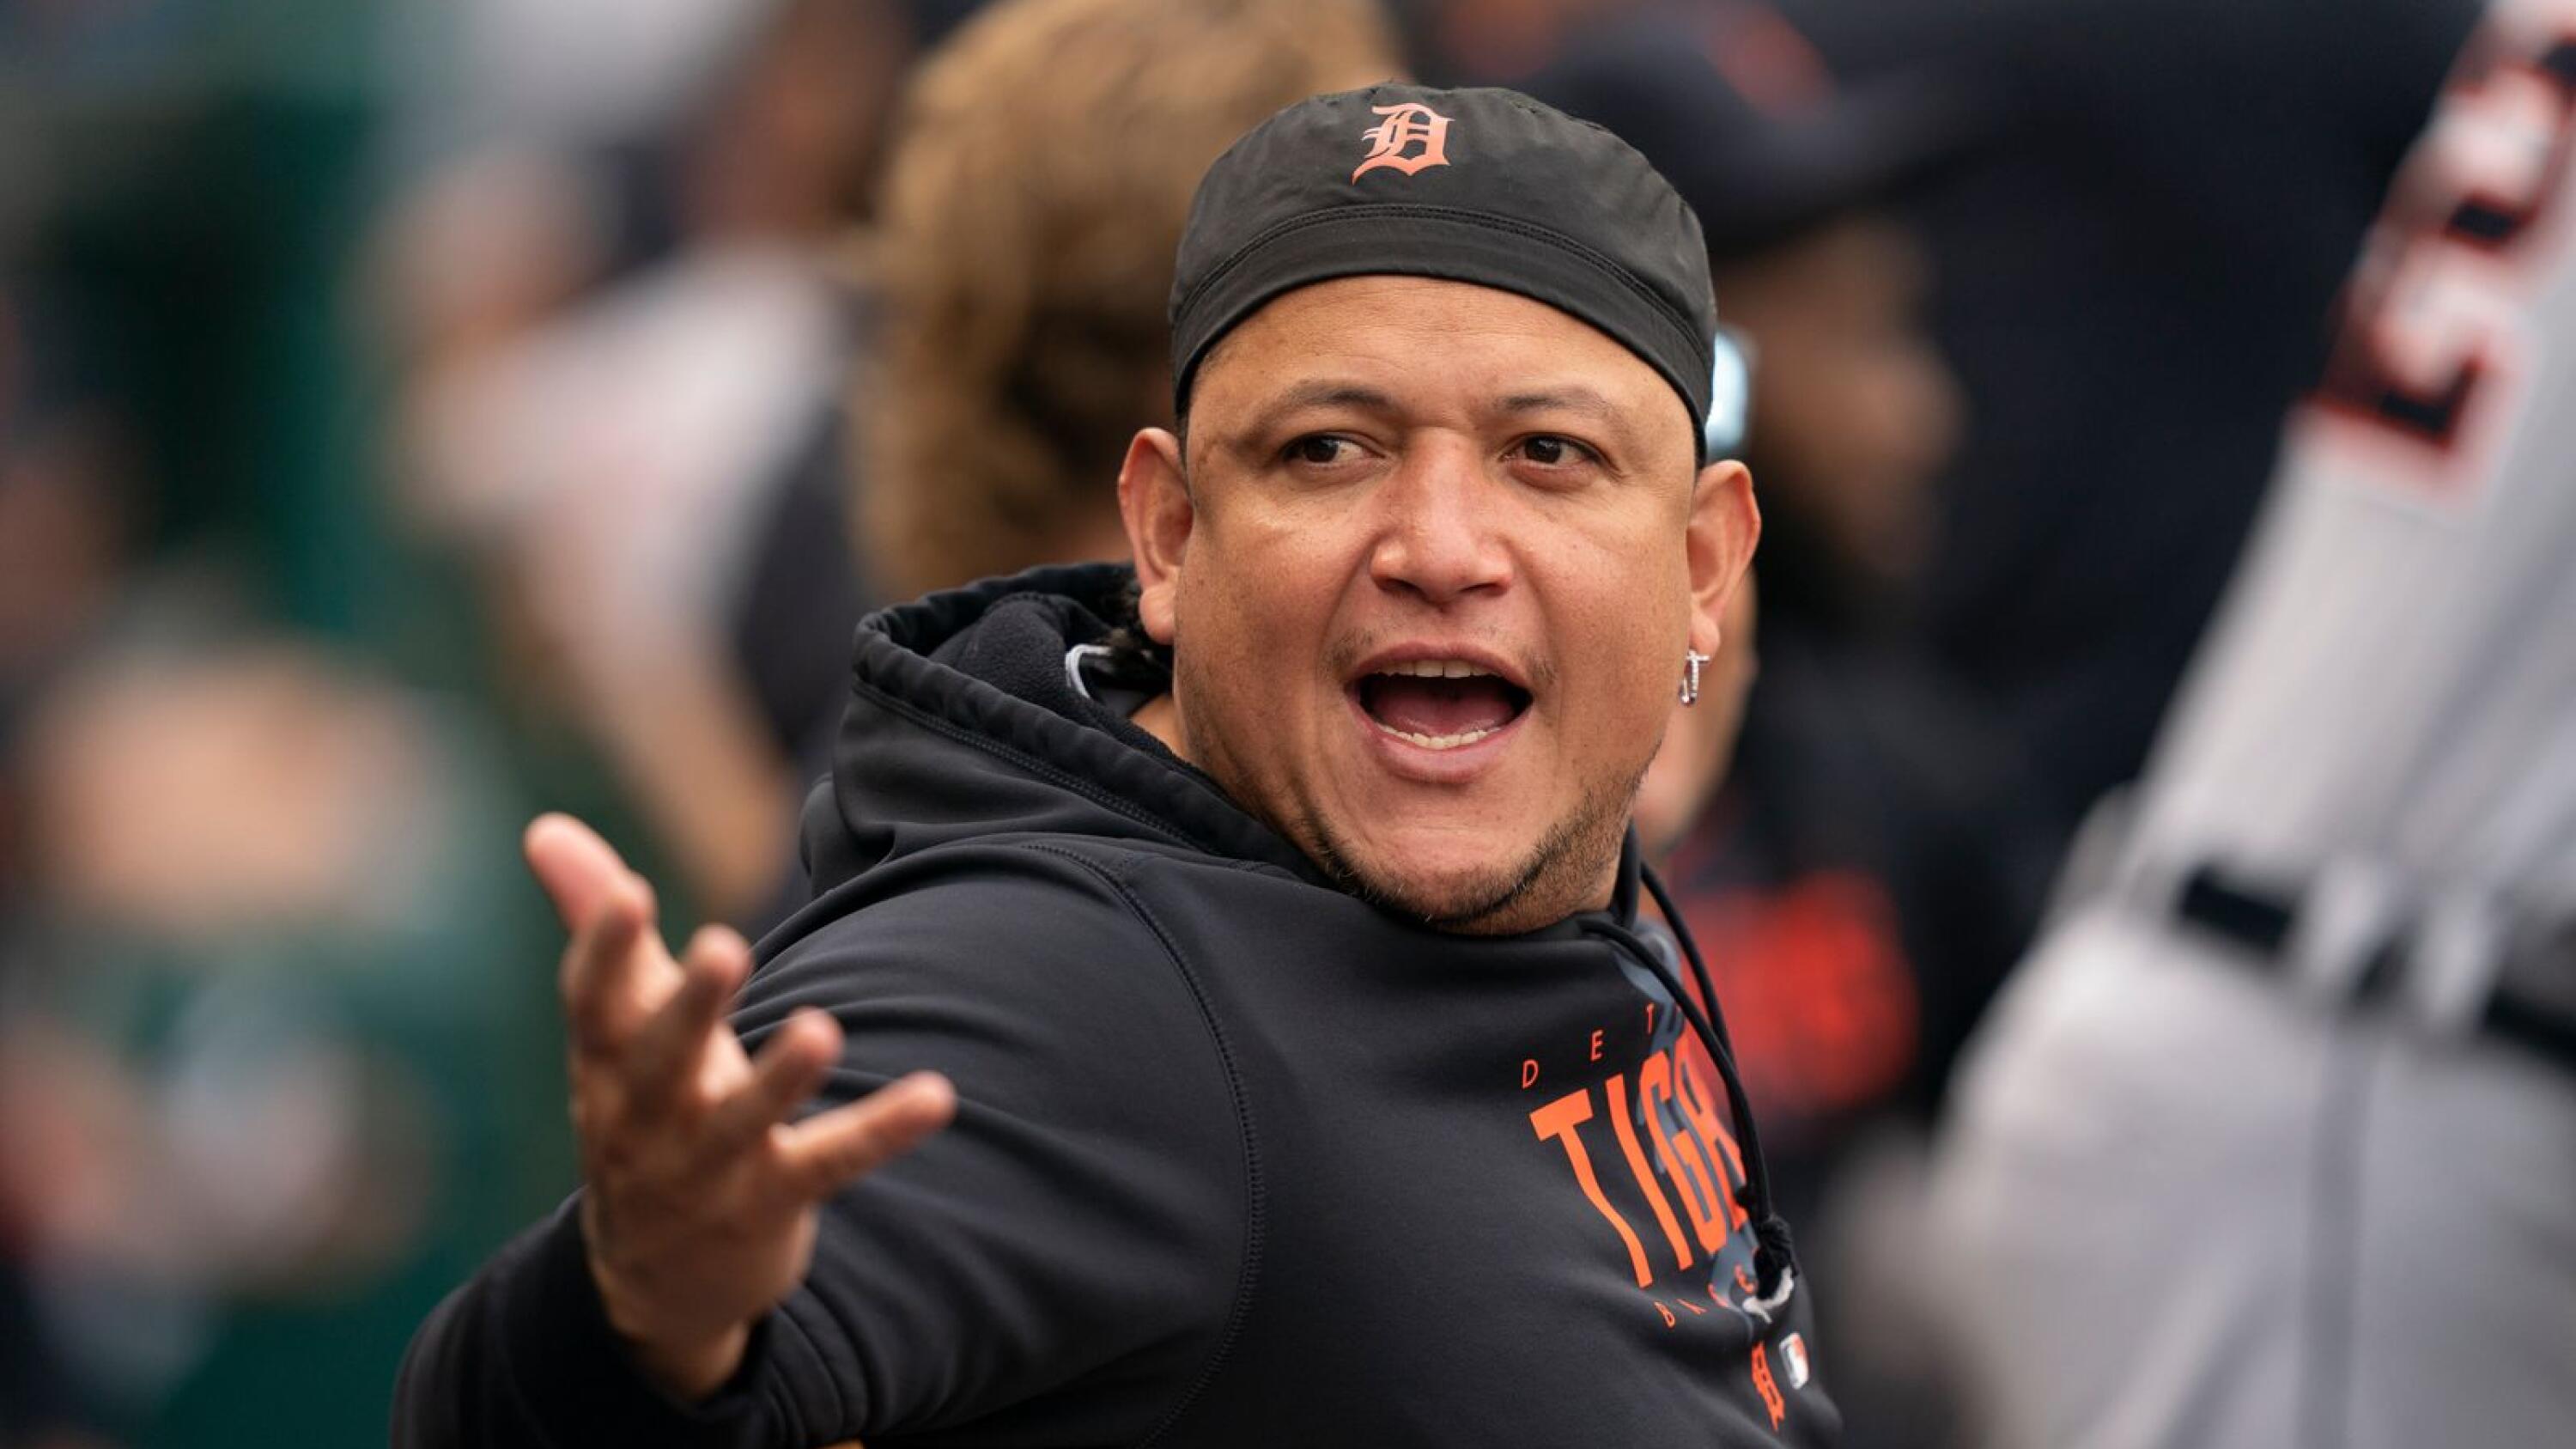 Detroit Tigers' Miguel Cabrera locks up 4th batting title in 5 years